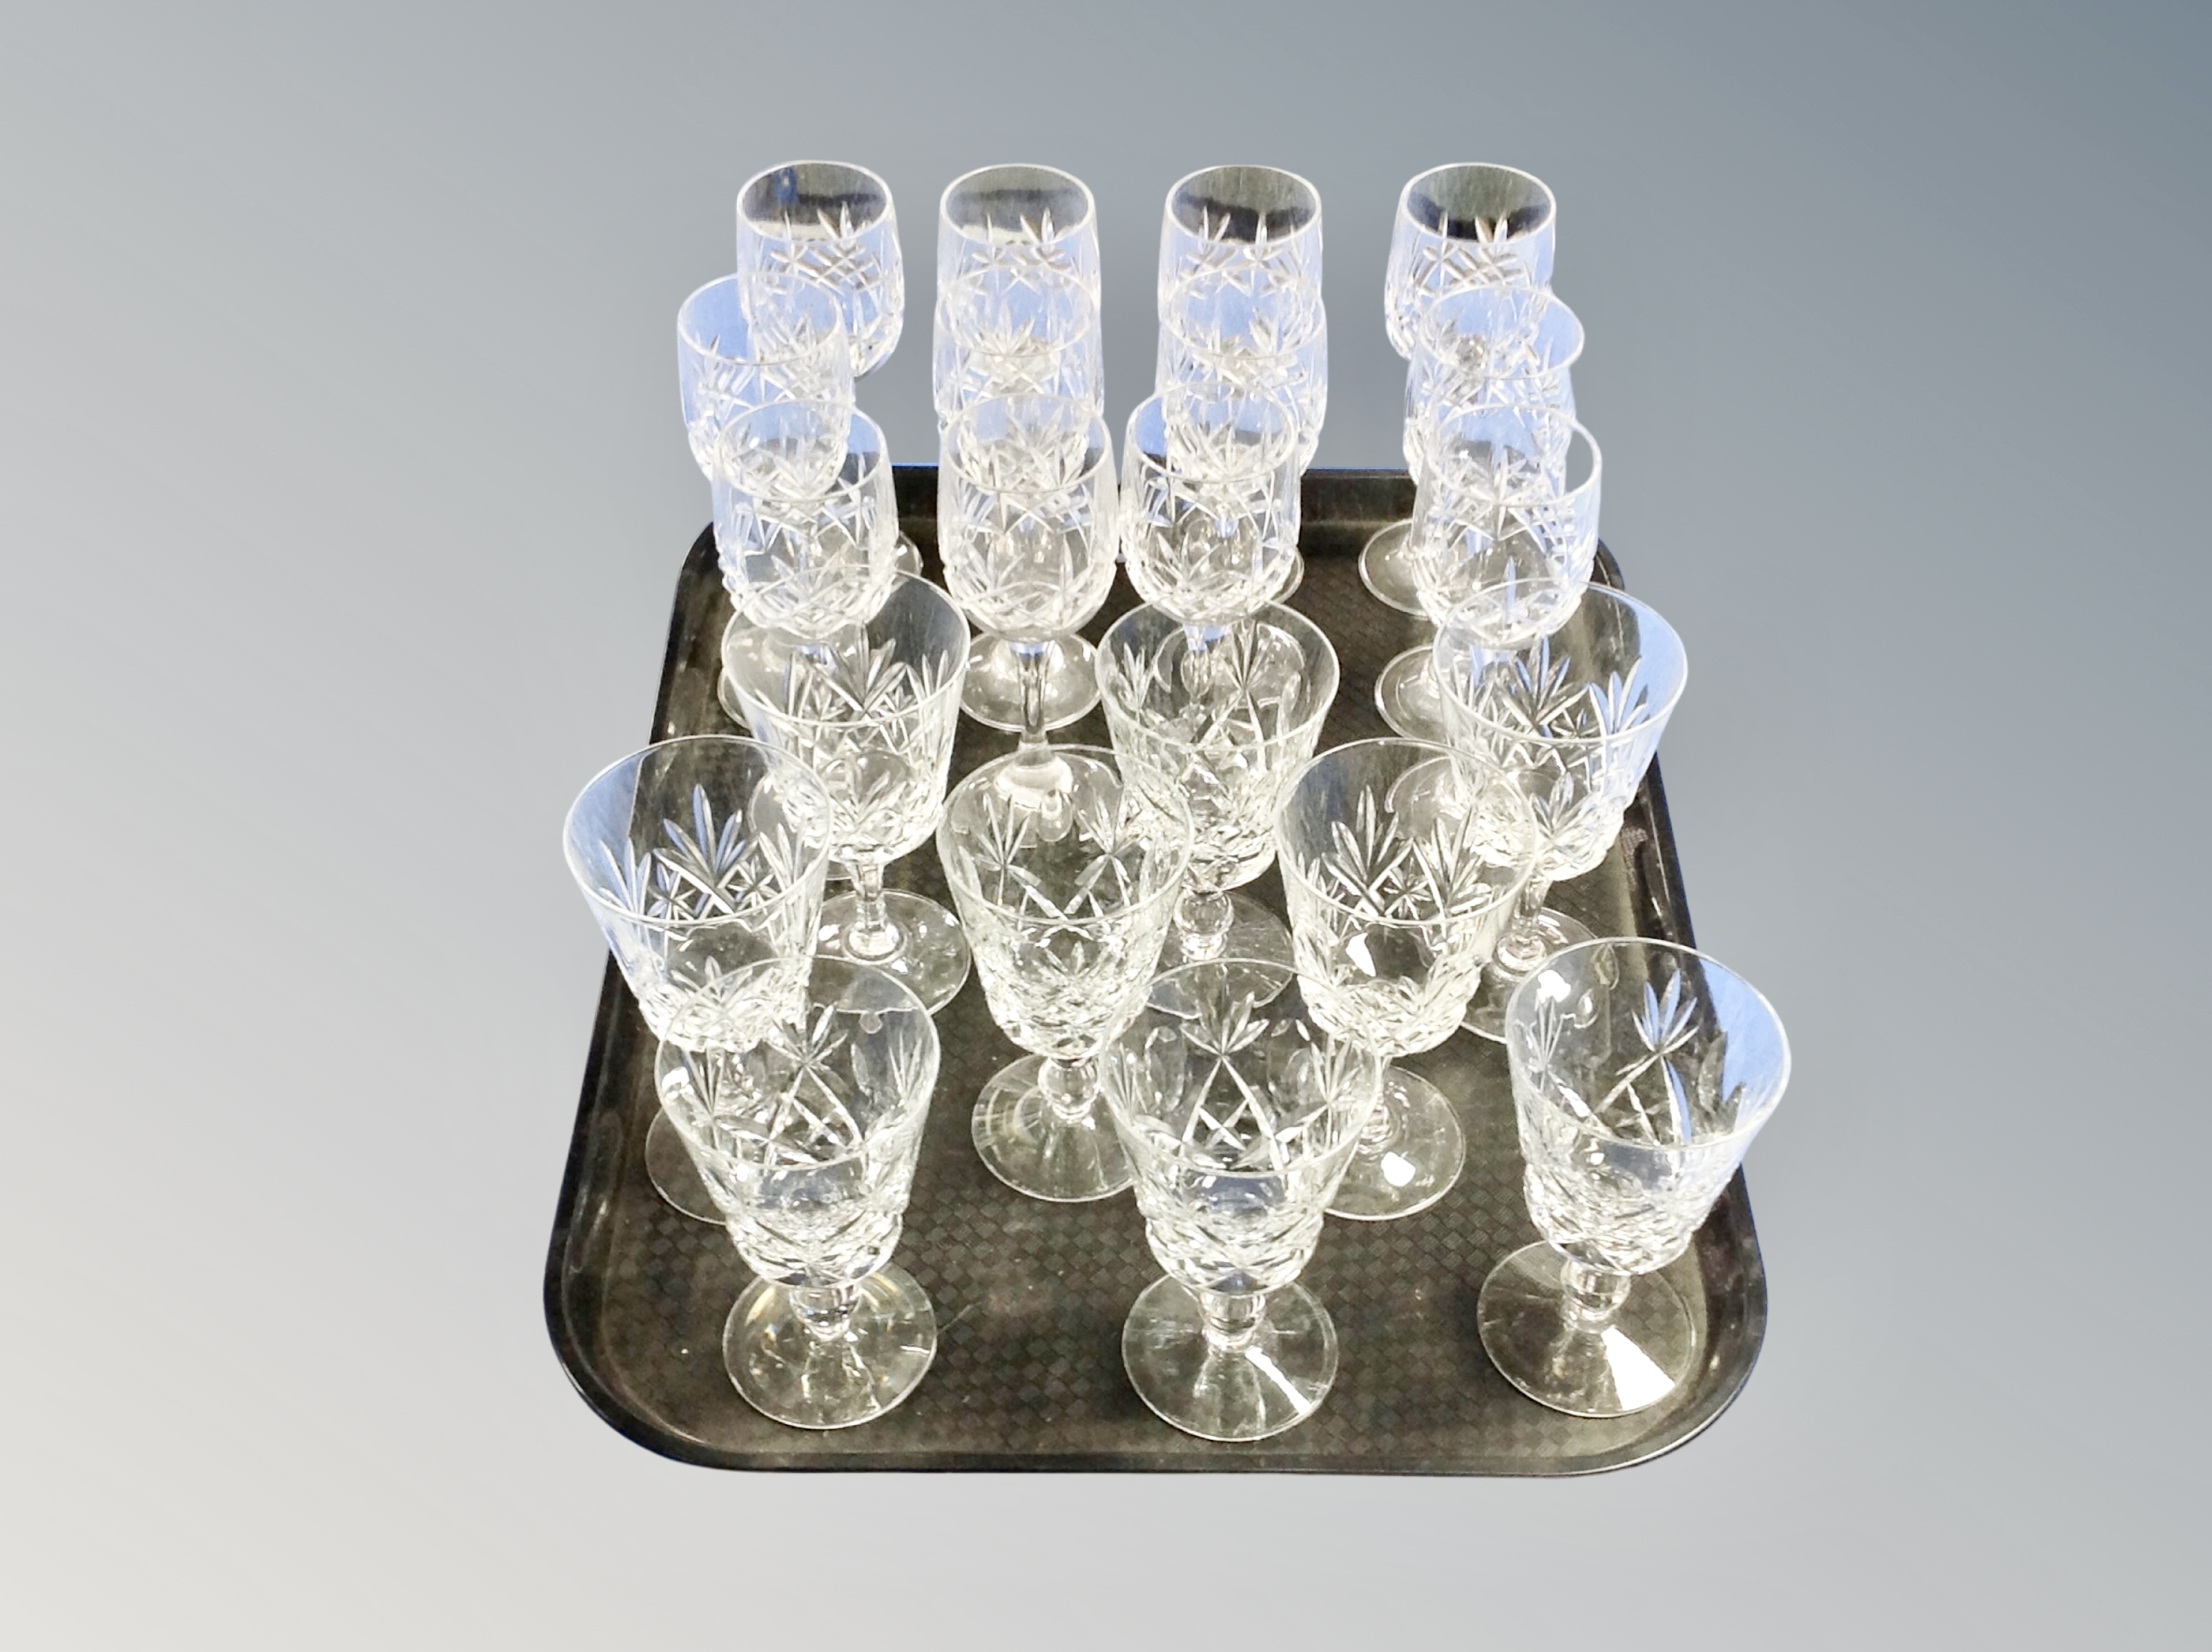 A tray of lead crystal drinking glasses